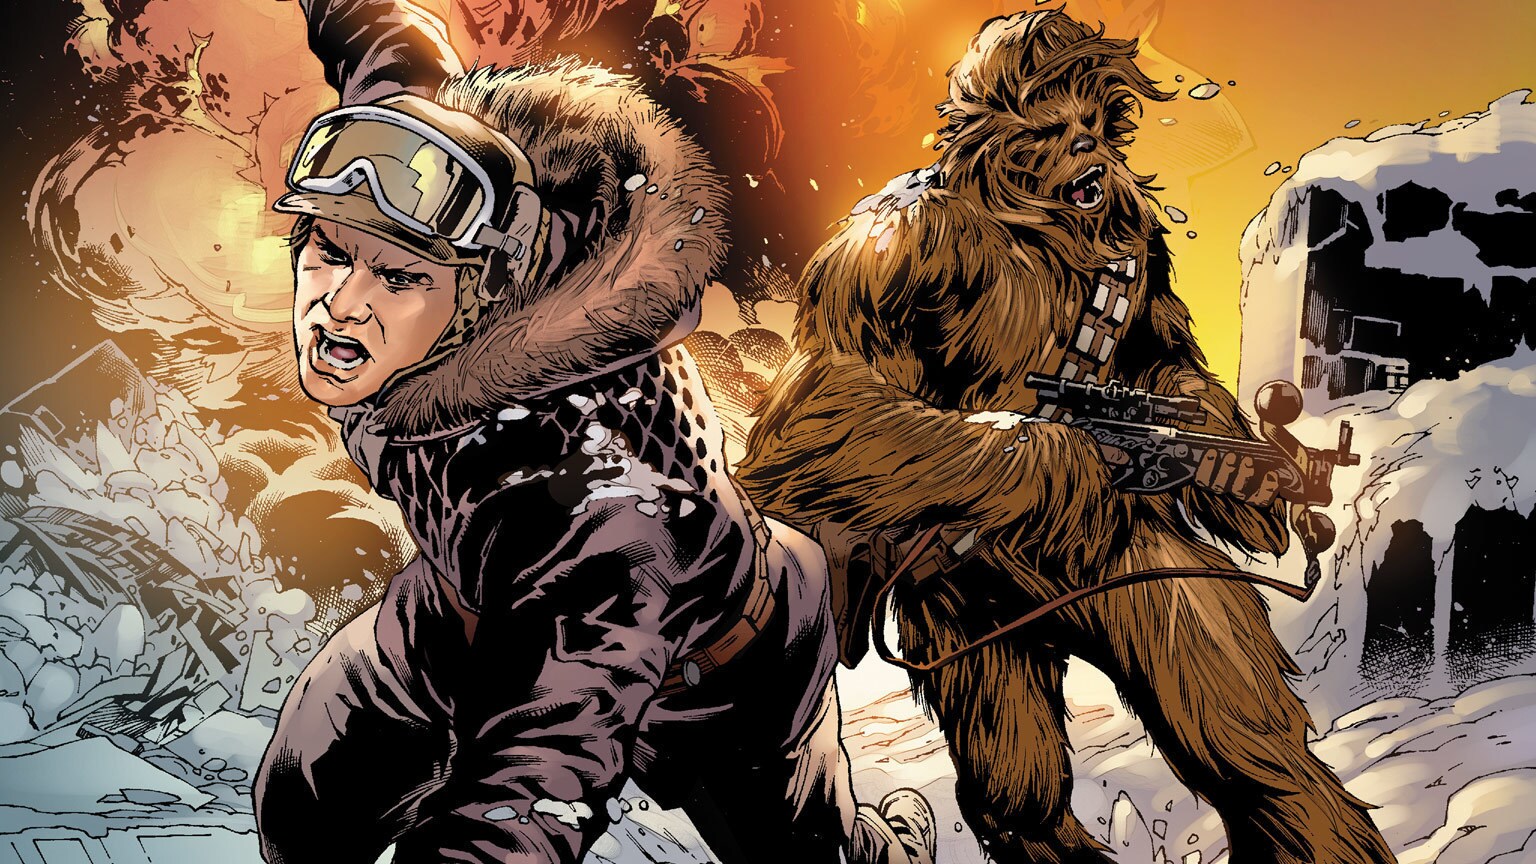 Leia and Kes Reflect on Those They Love in Marvel’s Star Wars #12 - Exclusive Preview